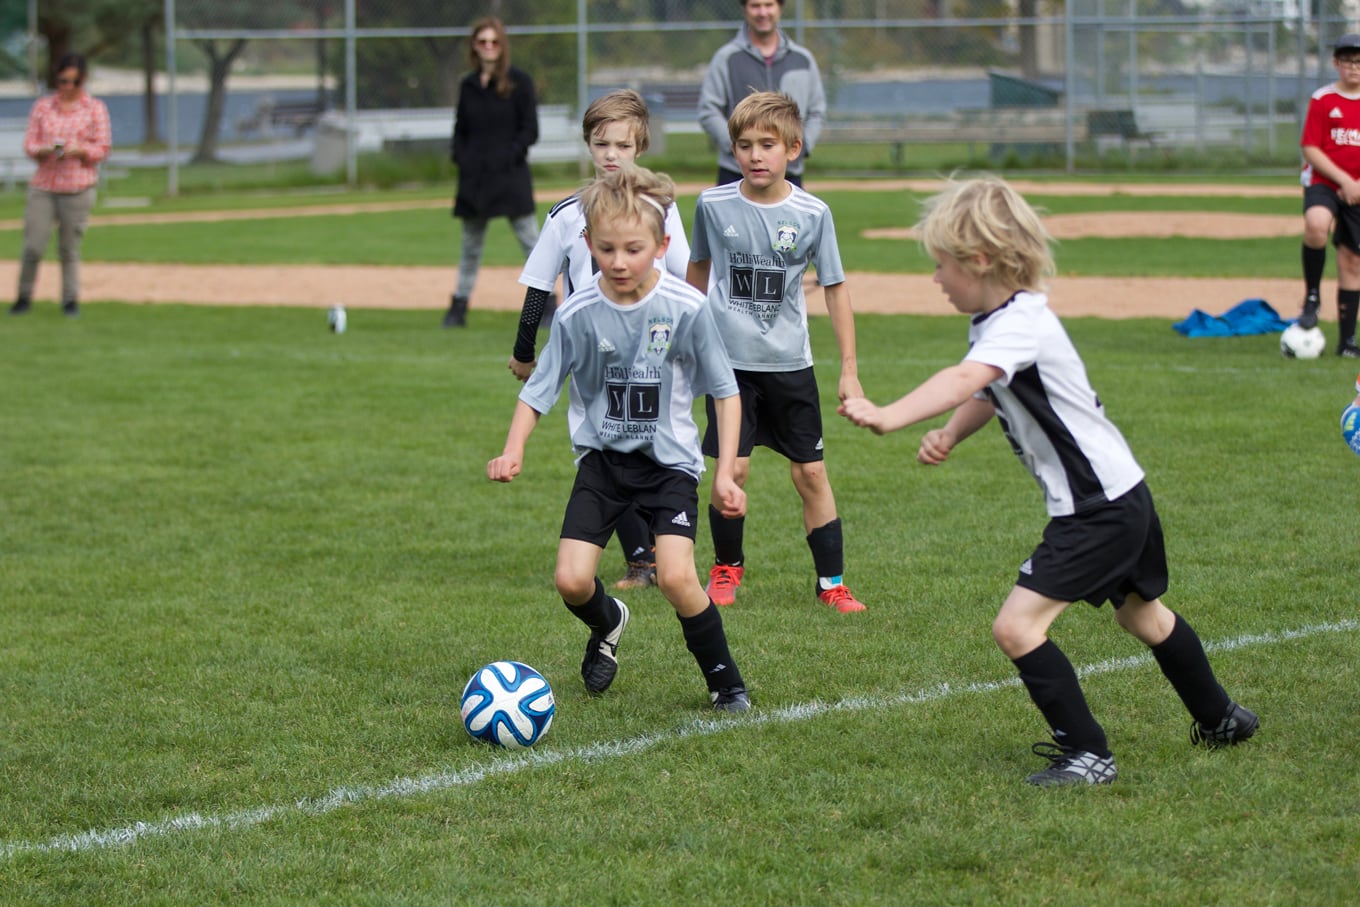 Columbia Basin Community Foundations can help support kids' summer sports